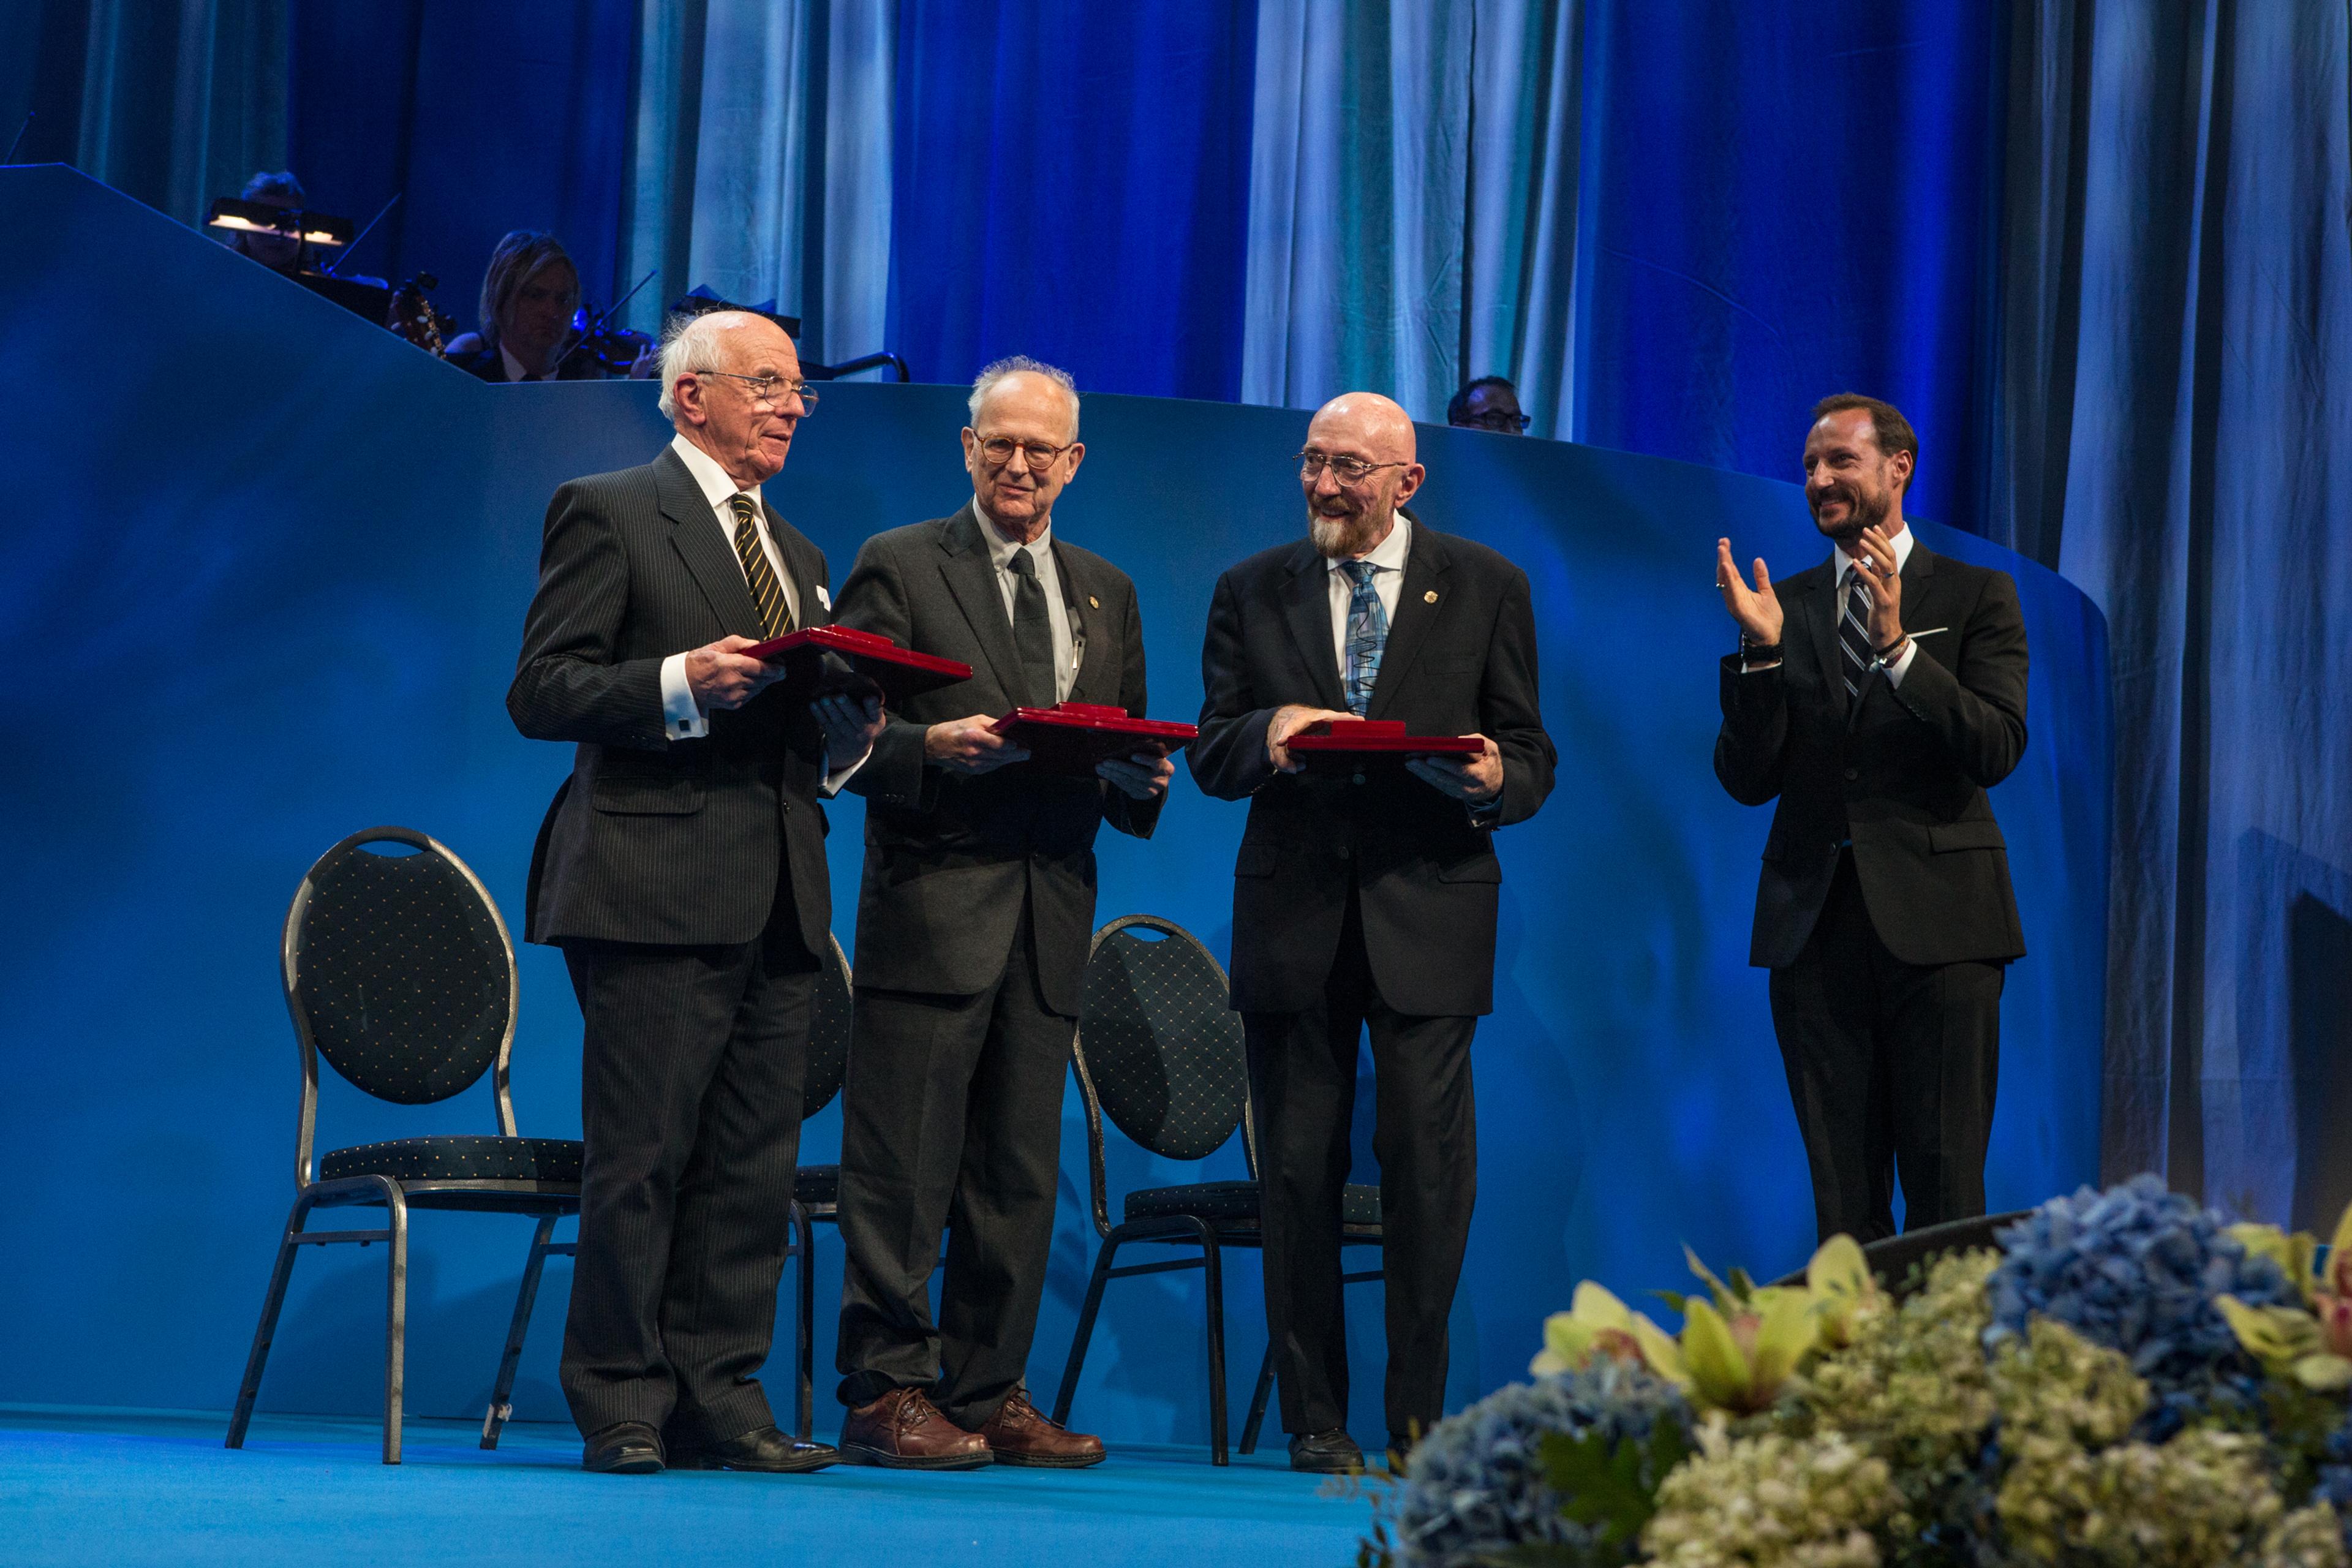 The three astrophysics laureates on stage at the ceremony in Oslo with their awards; from left: Ronald W.P. Drever's representative, Rainer Weiss, Kip S. Thorne and His Royal Highness Crown Prince Haakon 